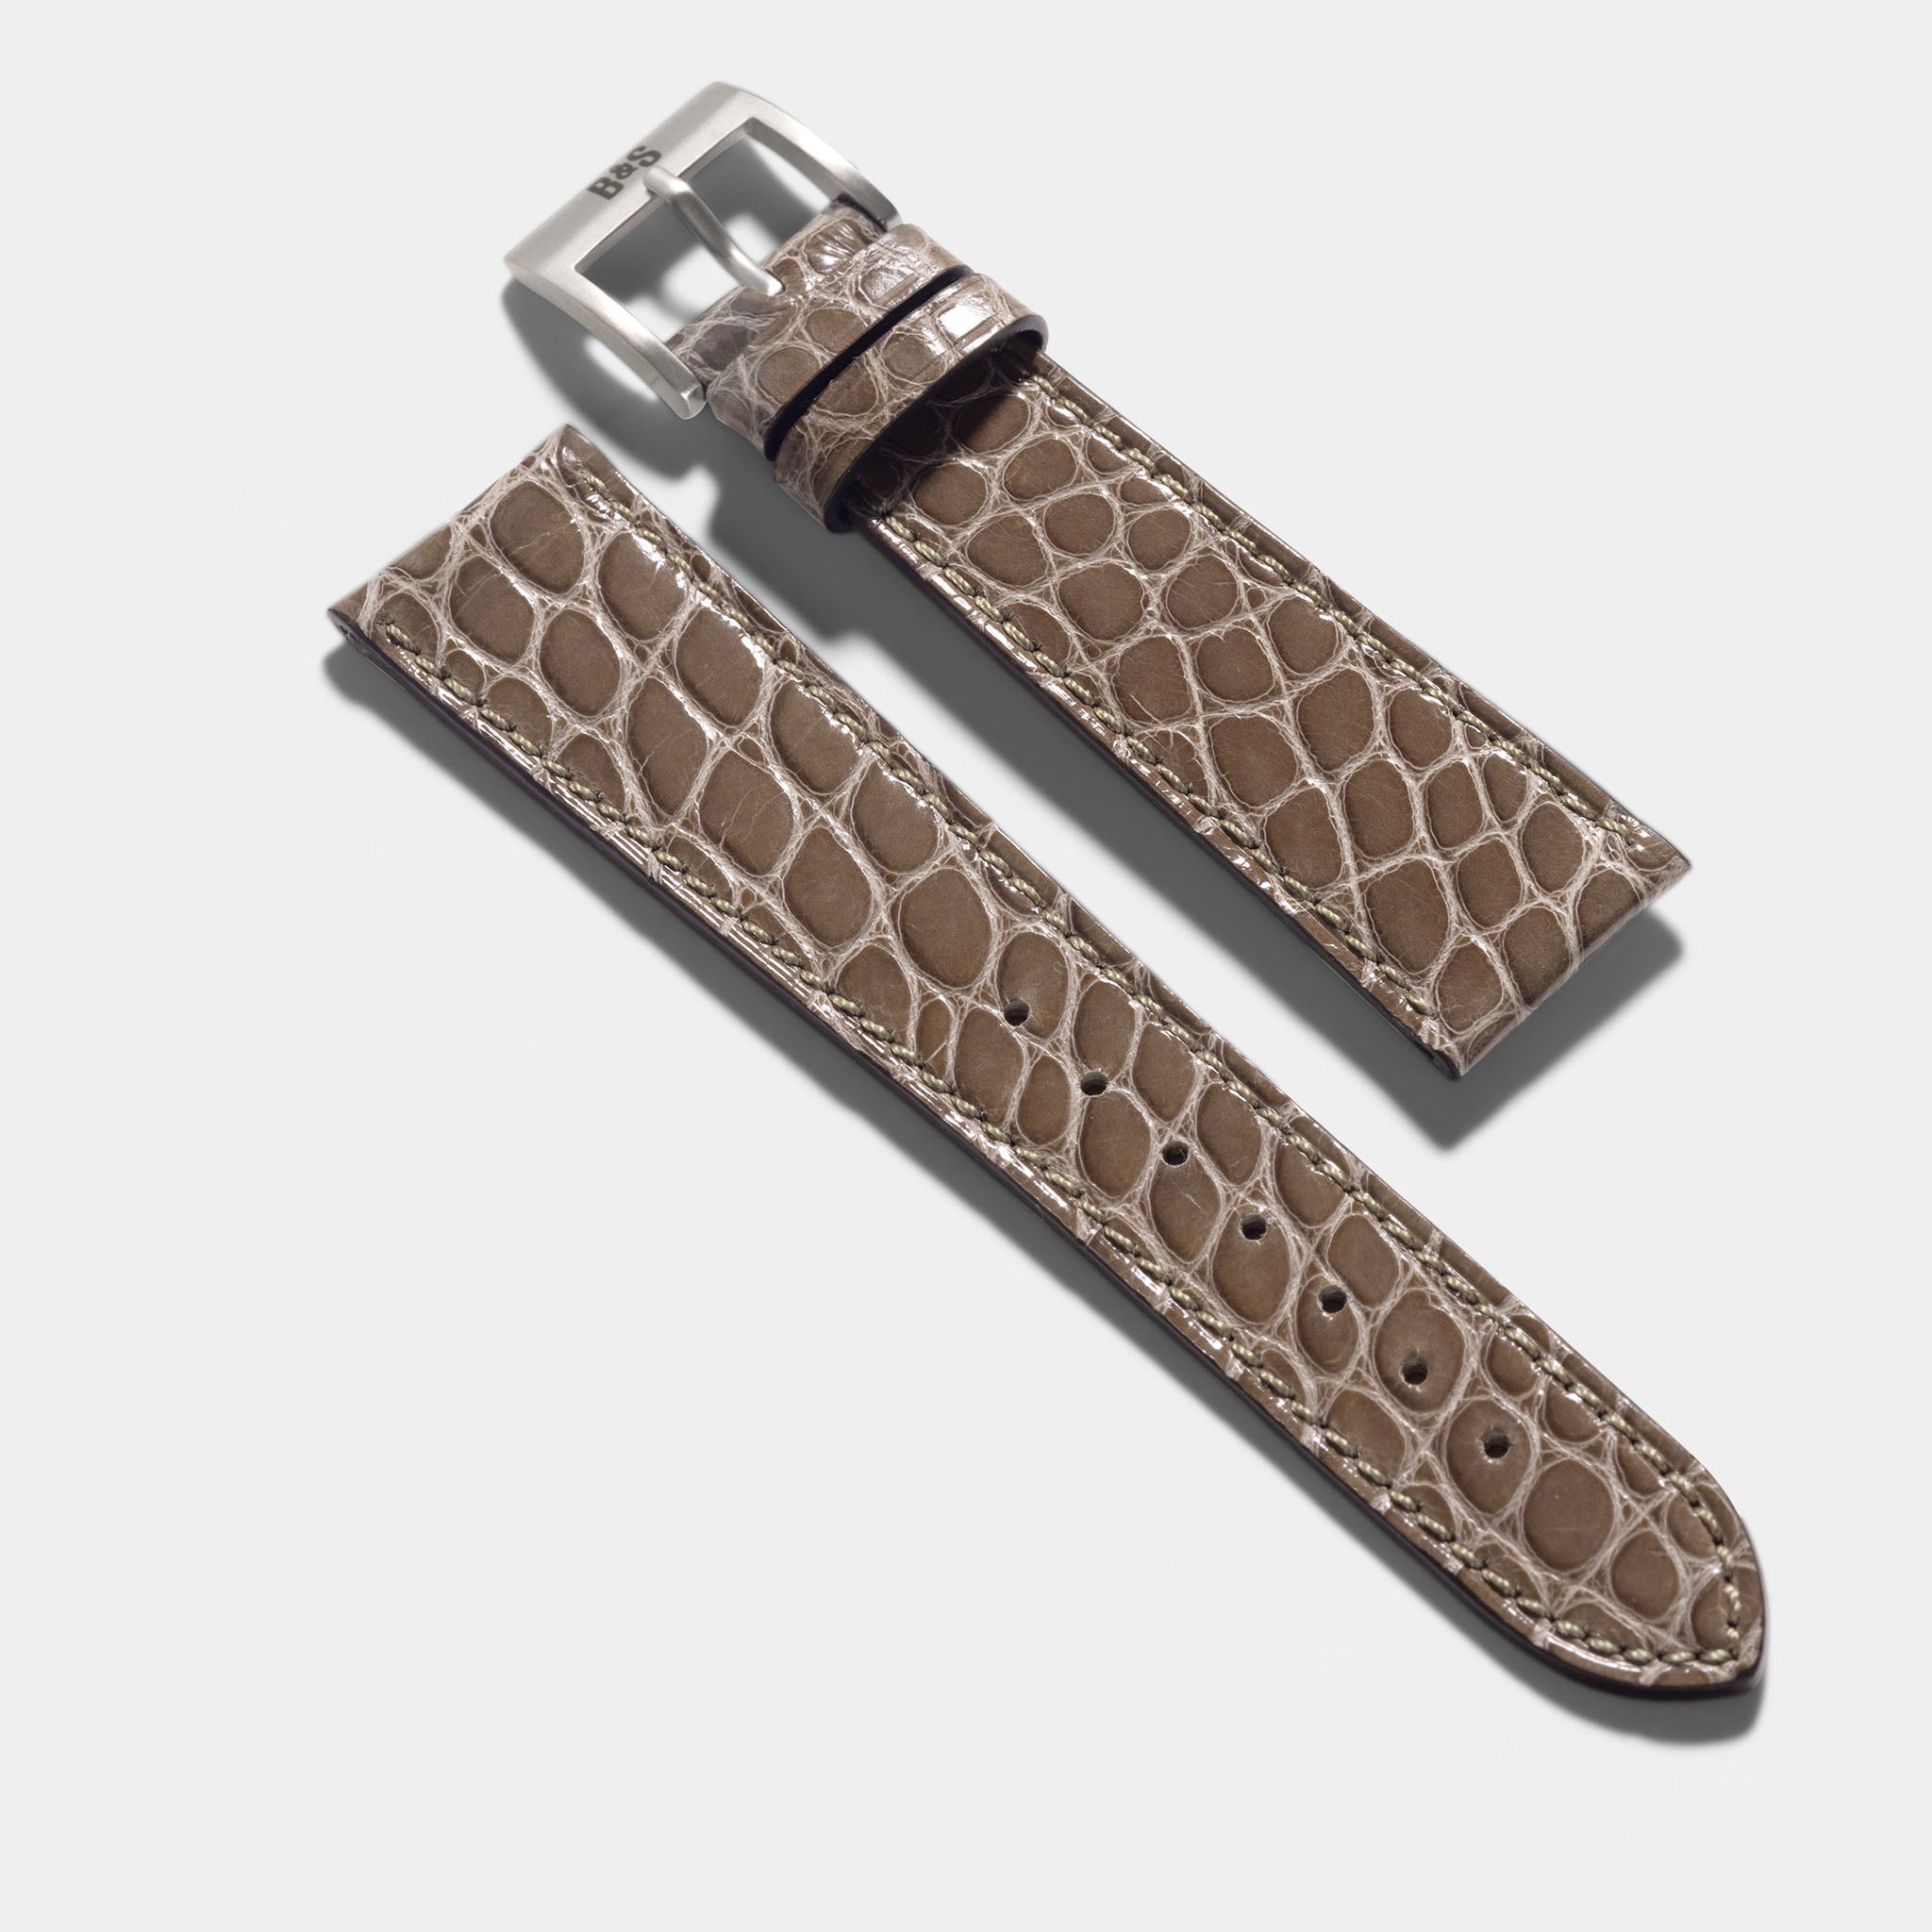 Grey Alligator Leather Watch Strap for luxury watches